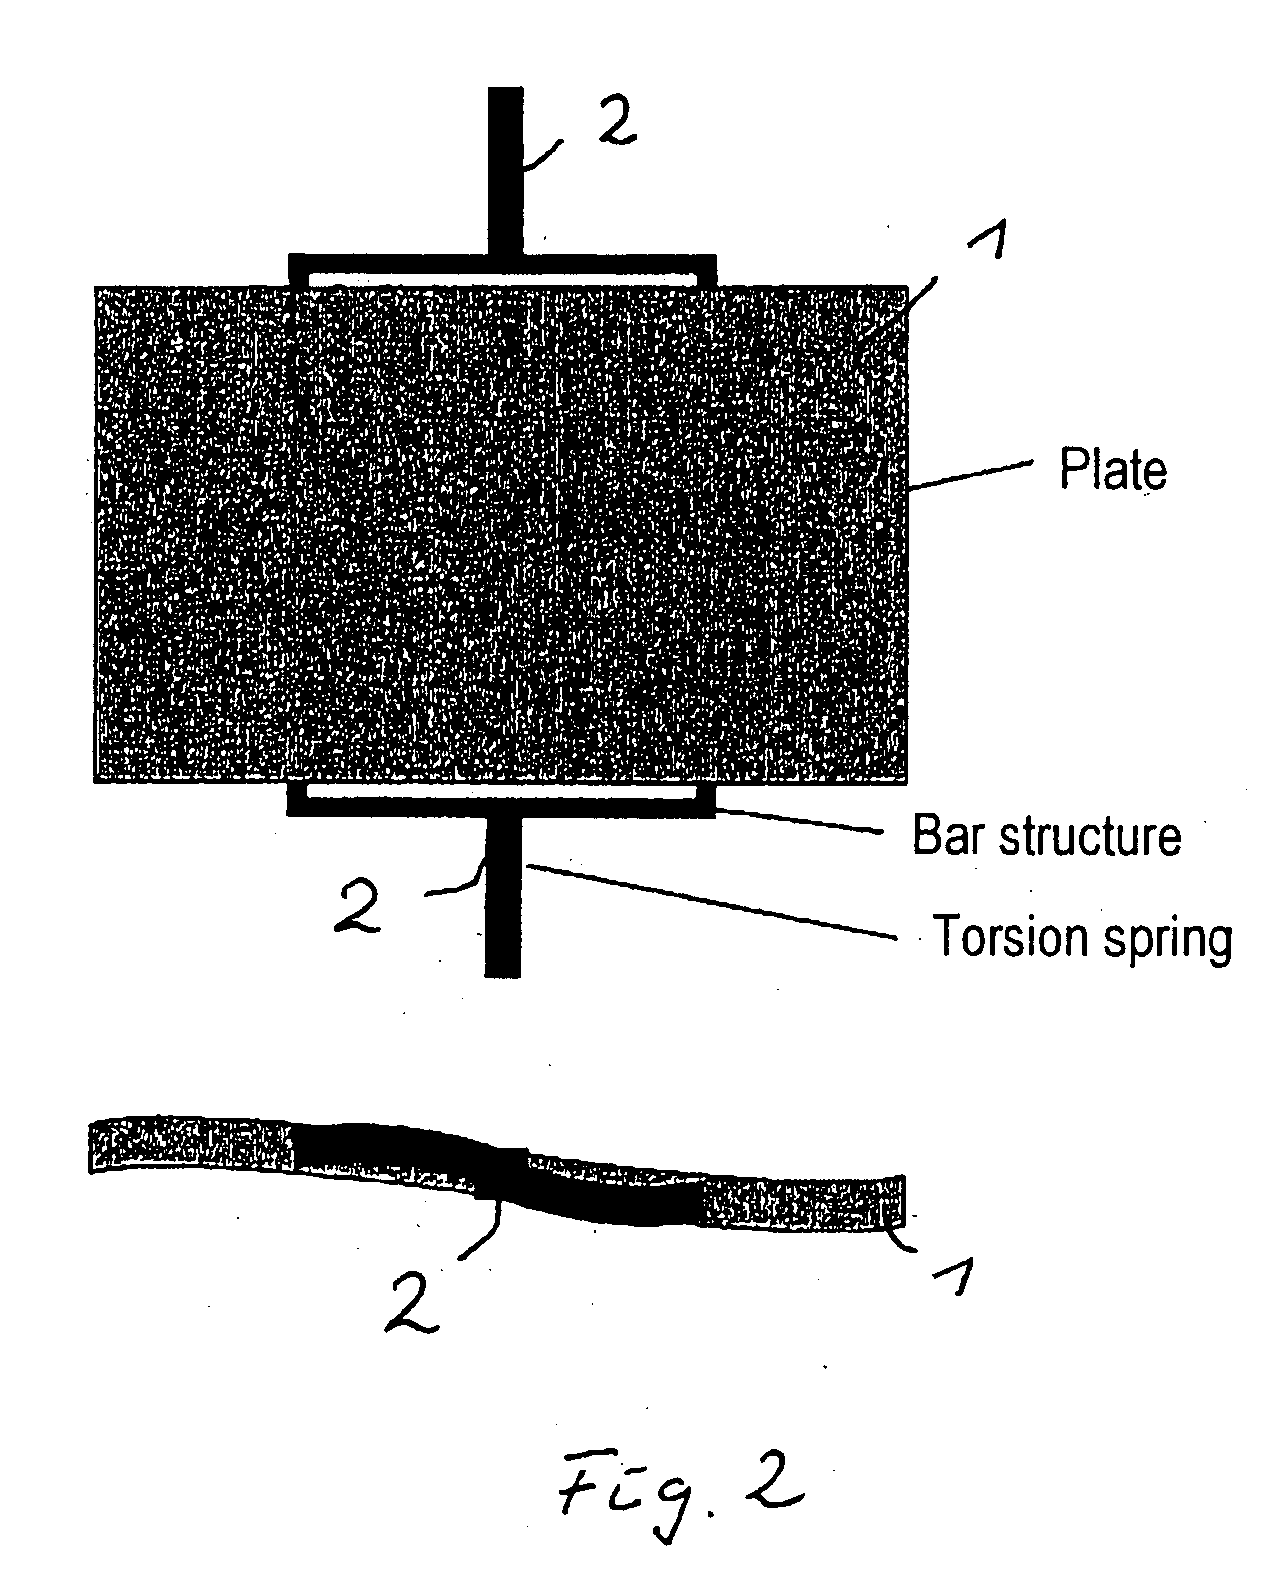 Micromechanical optical element having a reflective surface as well as its use